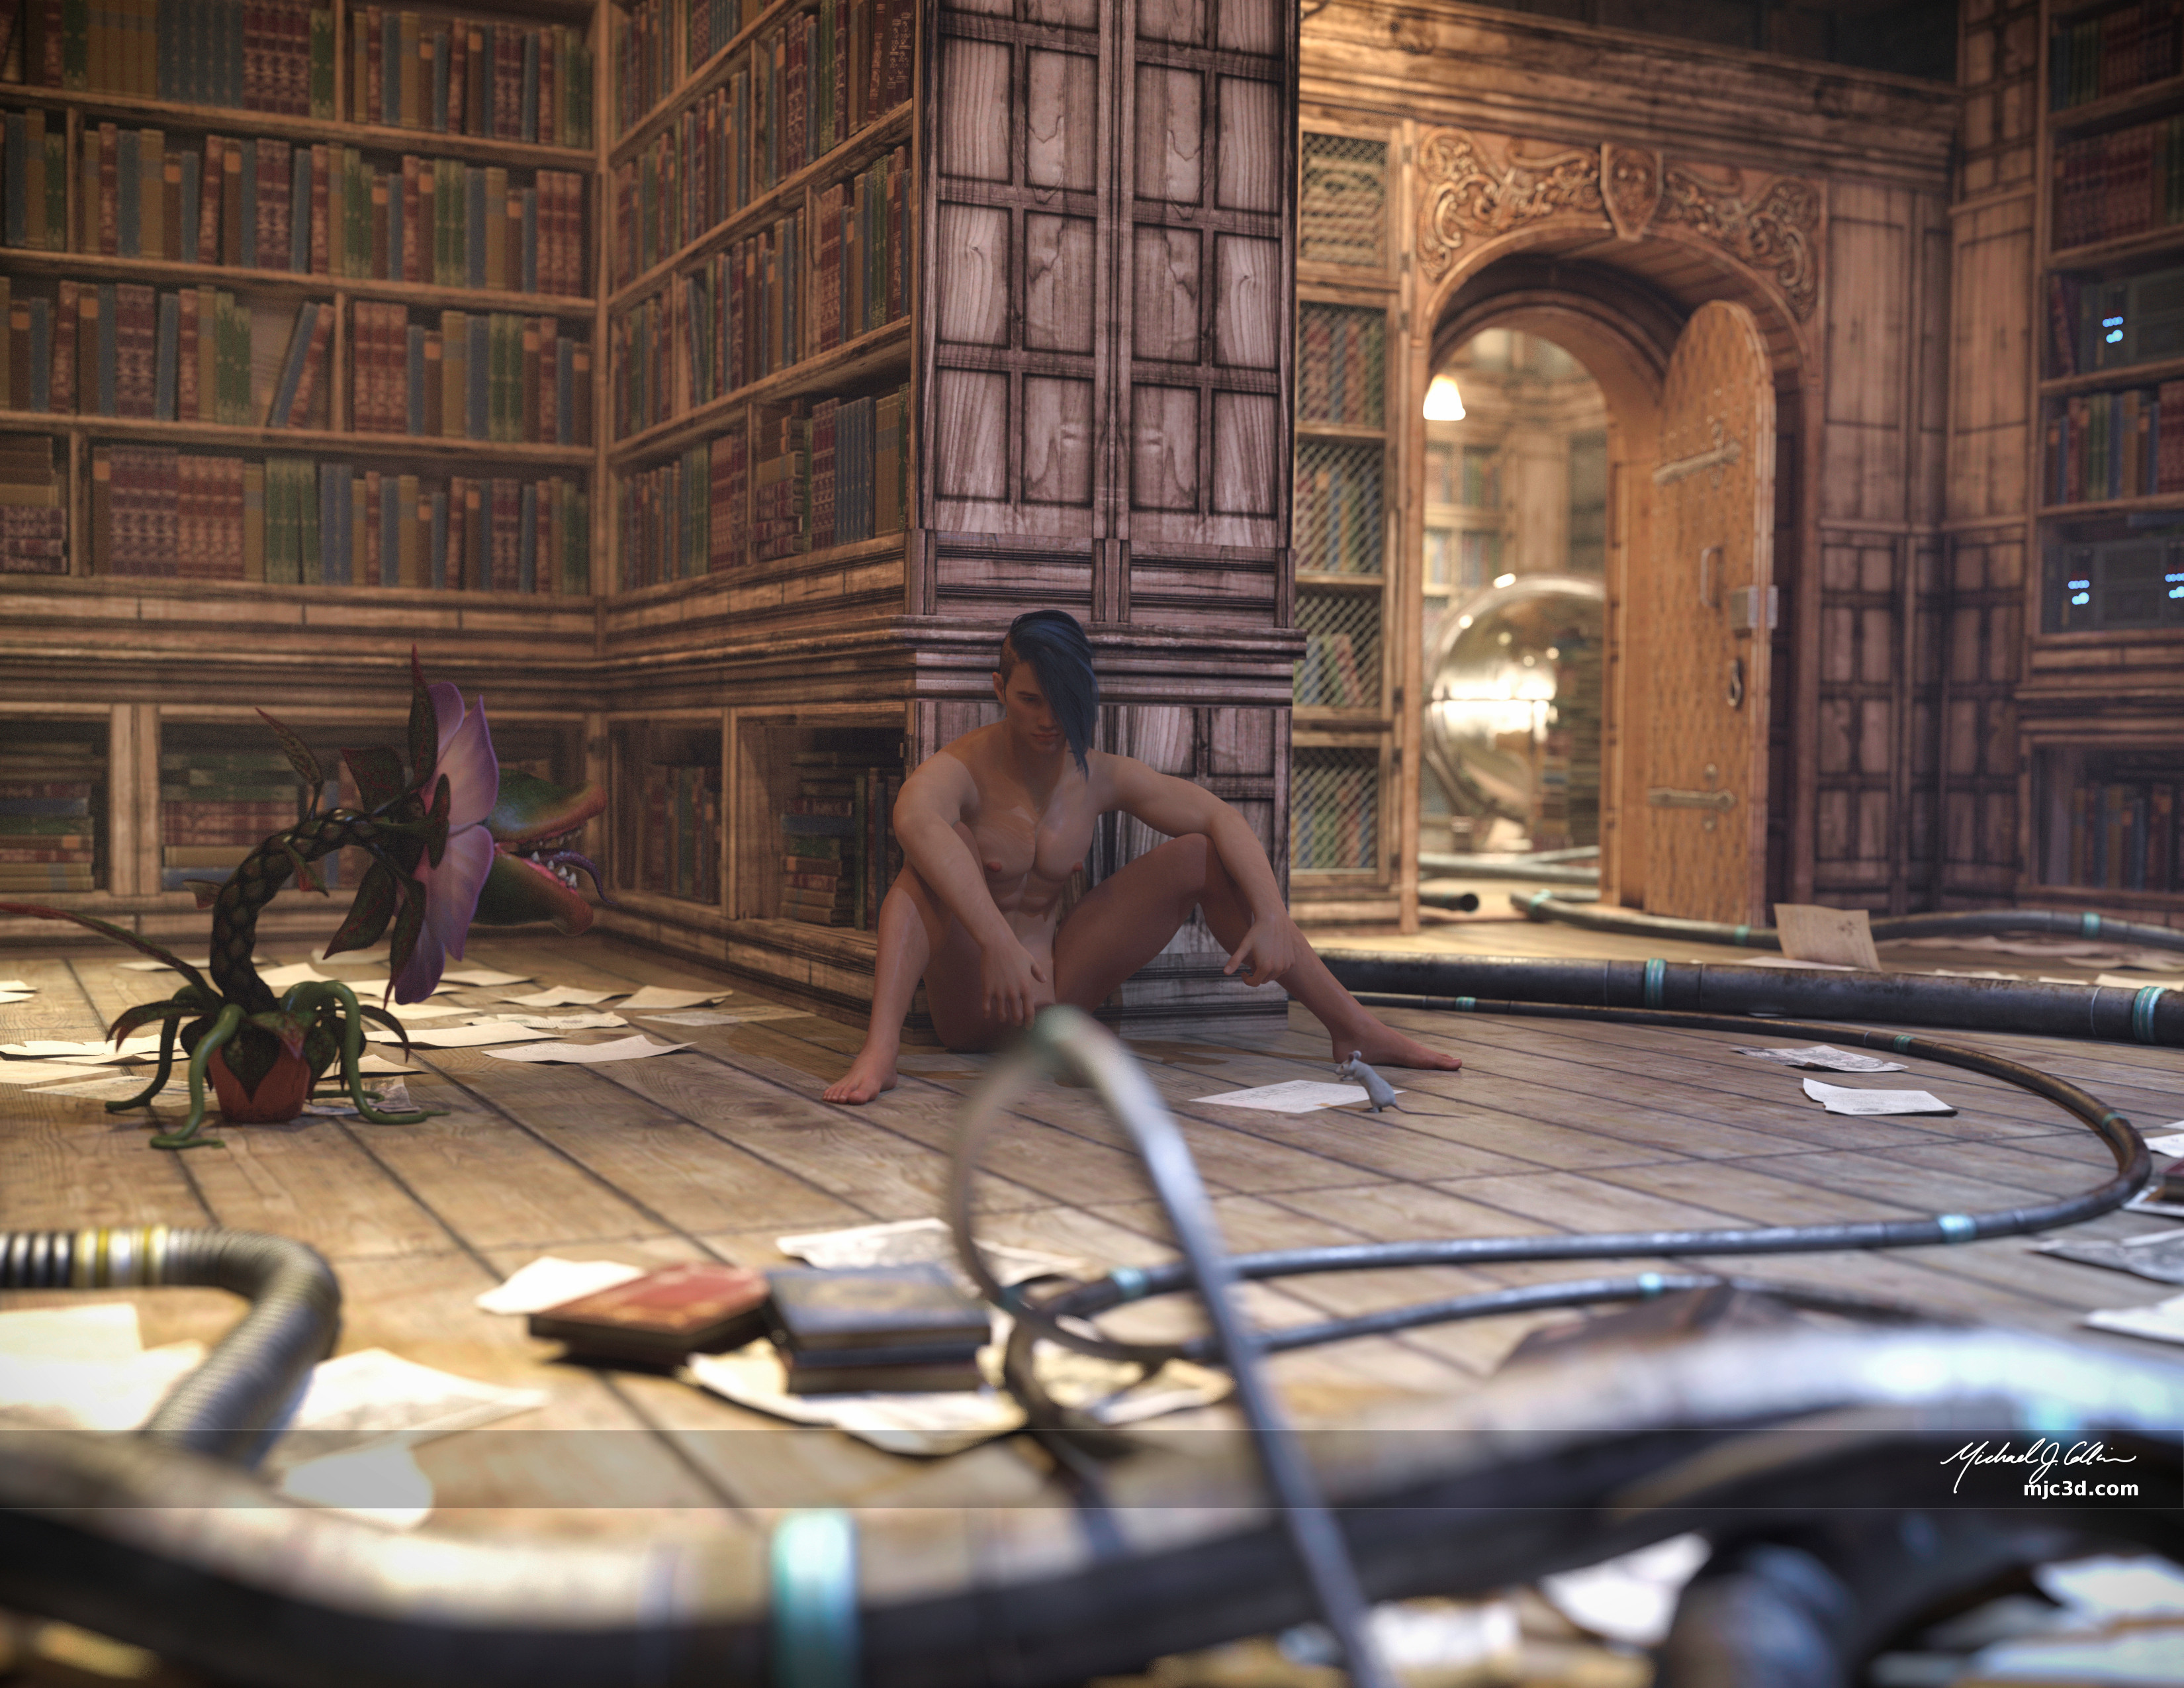 We see a naked, muscular, European man with dark hair and long bangs draped over half of his face, sitting on the floor with his legs spread and his outstretched arms resting on his knees. The room he is in appears to be a rather old library. Thick cables are strewn about. The walls are filled with books and there is a strange metal orb in a room off to the side and rear. A large carnivorous plant, similar to a Venus Flytrap  is positioned off to his right and appears to be staring at him with its mouth open.